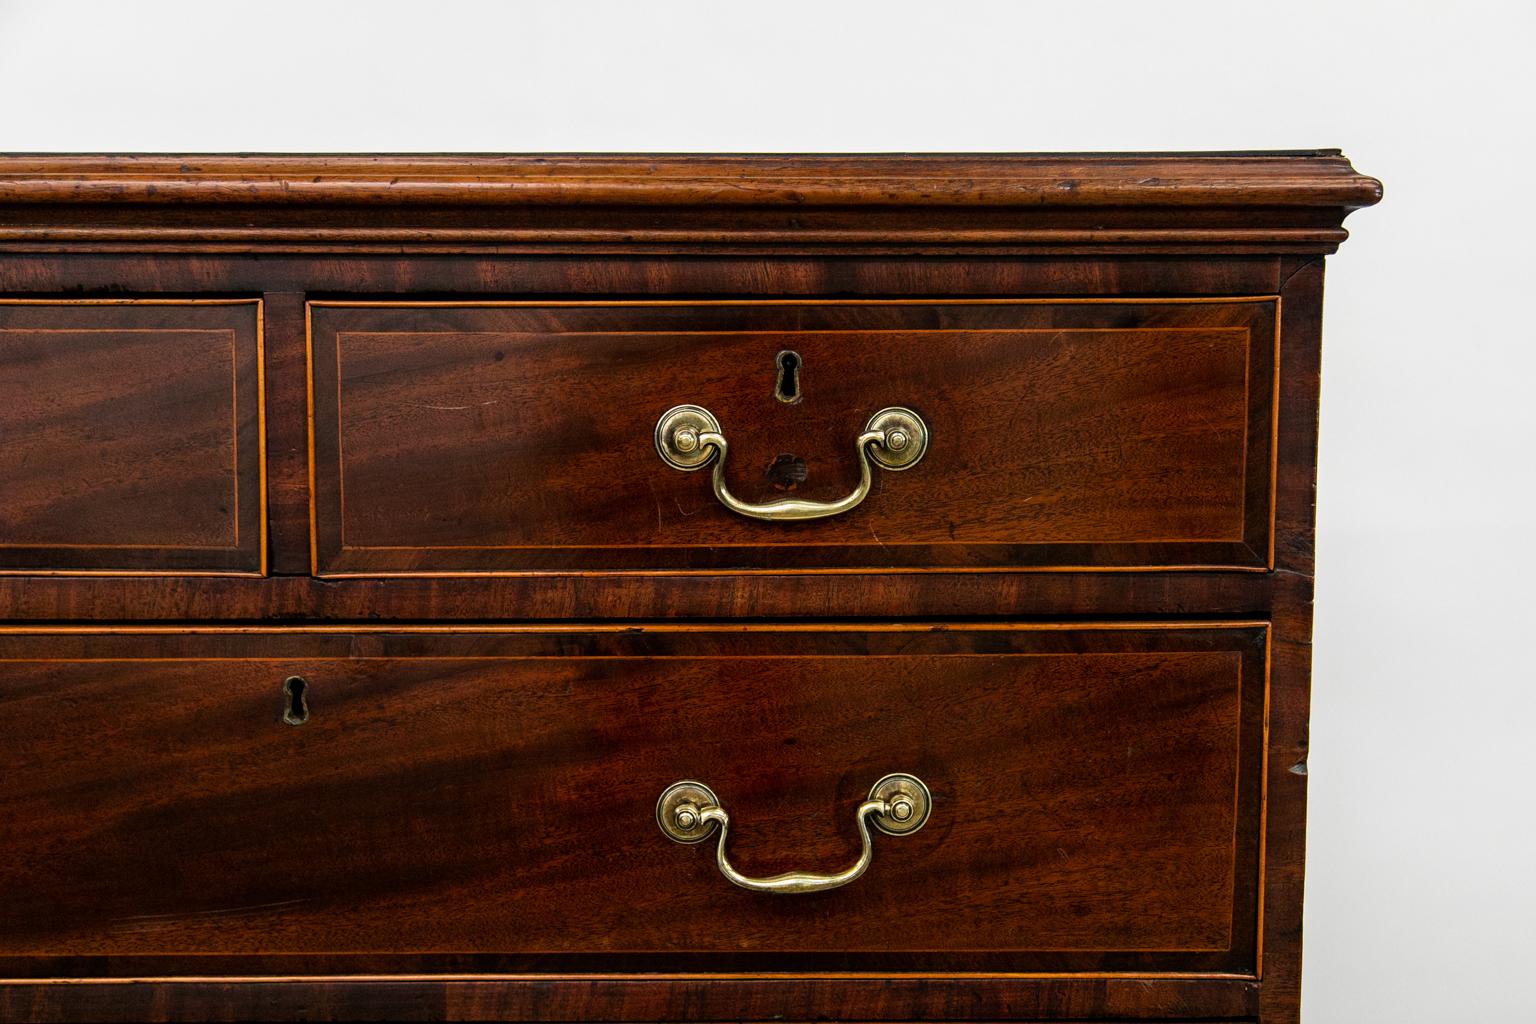 This chest is all original including the brasses. The top and drawer fronts are crossbanded with mahogany and inlaid with French boxwood. The drawers are framed with French boxwood cockbeading. The lock and key are original.